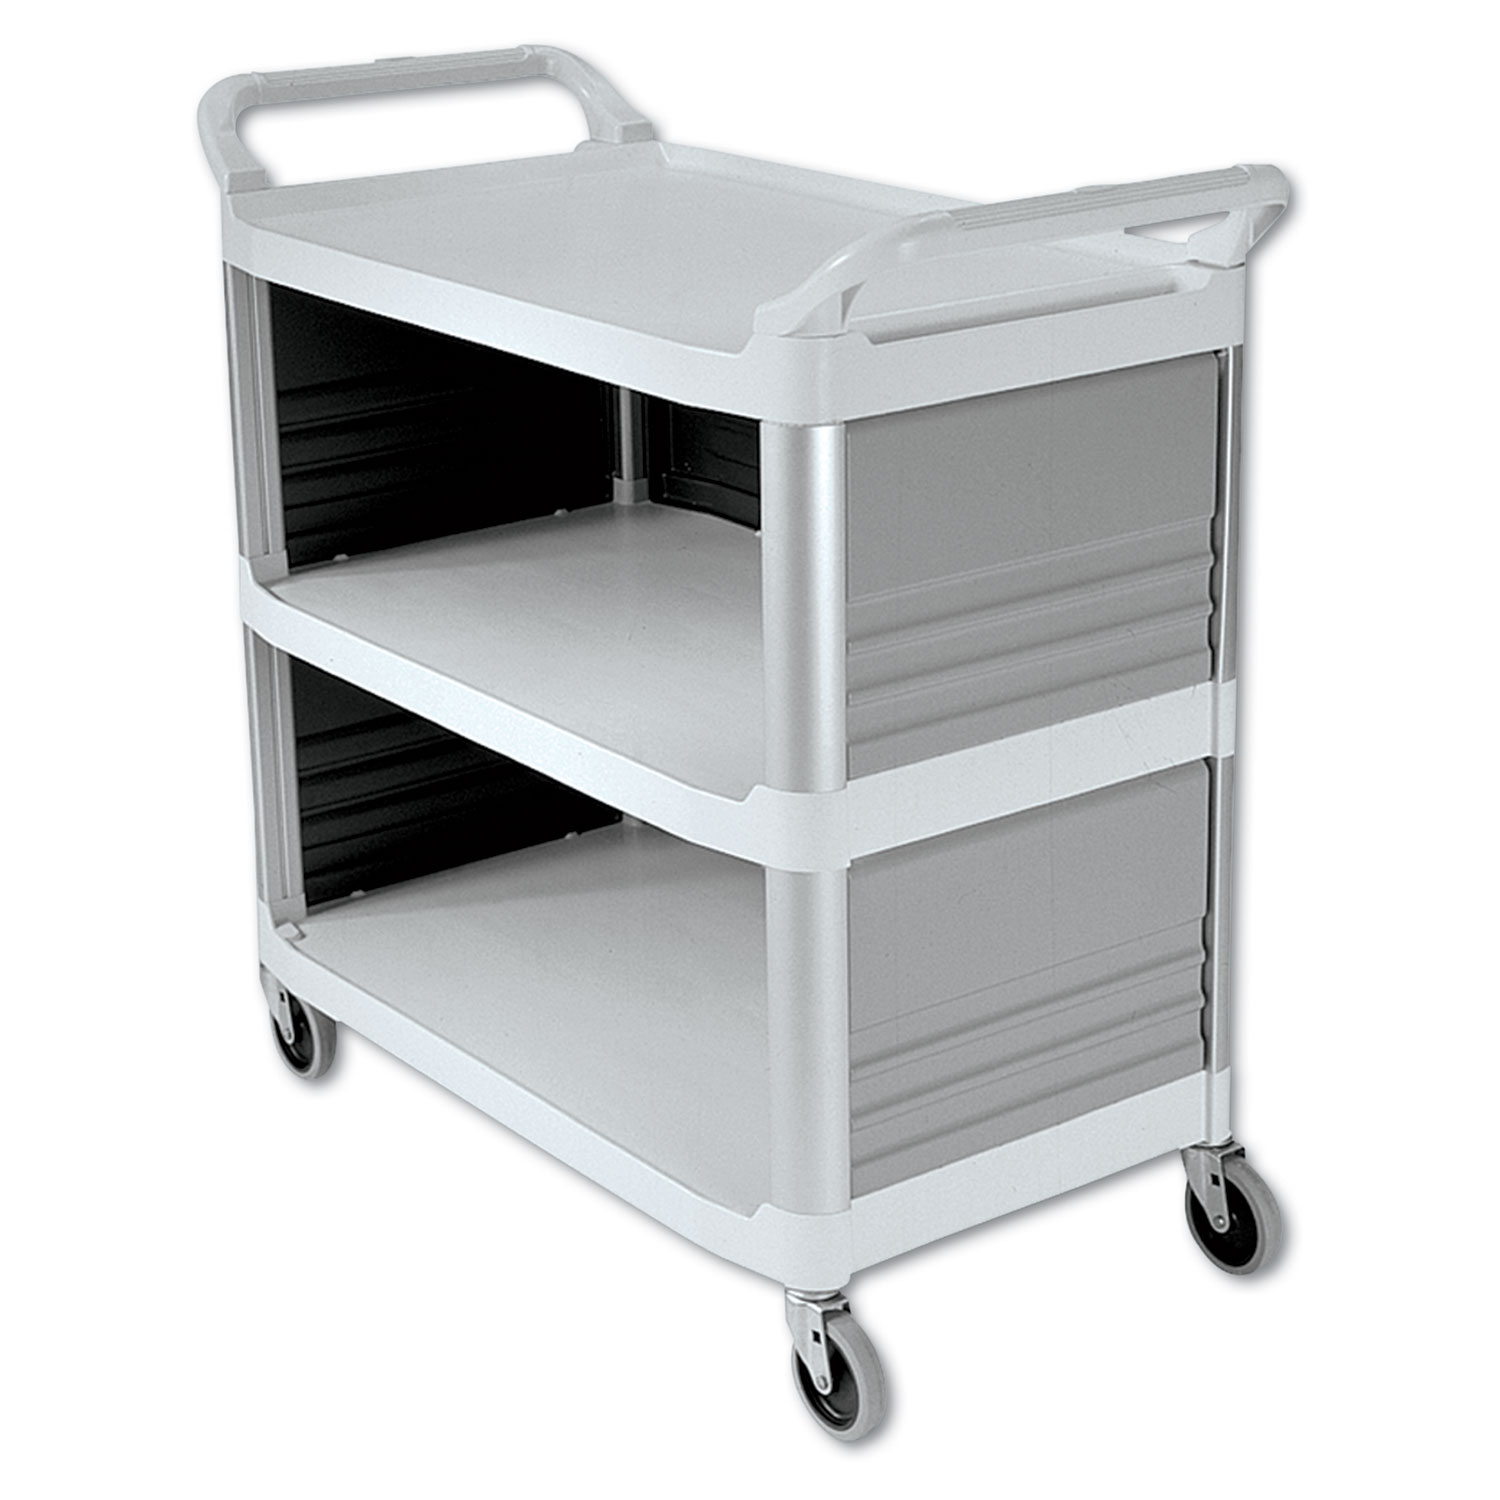  Rubbermaid Commercial FG409300OWHT Xtra Utility Cart, 300-lb Capacity, Three-Shelf, 20w x 40.63d x 37.8h, Off-White (RCP4093CRE) 